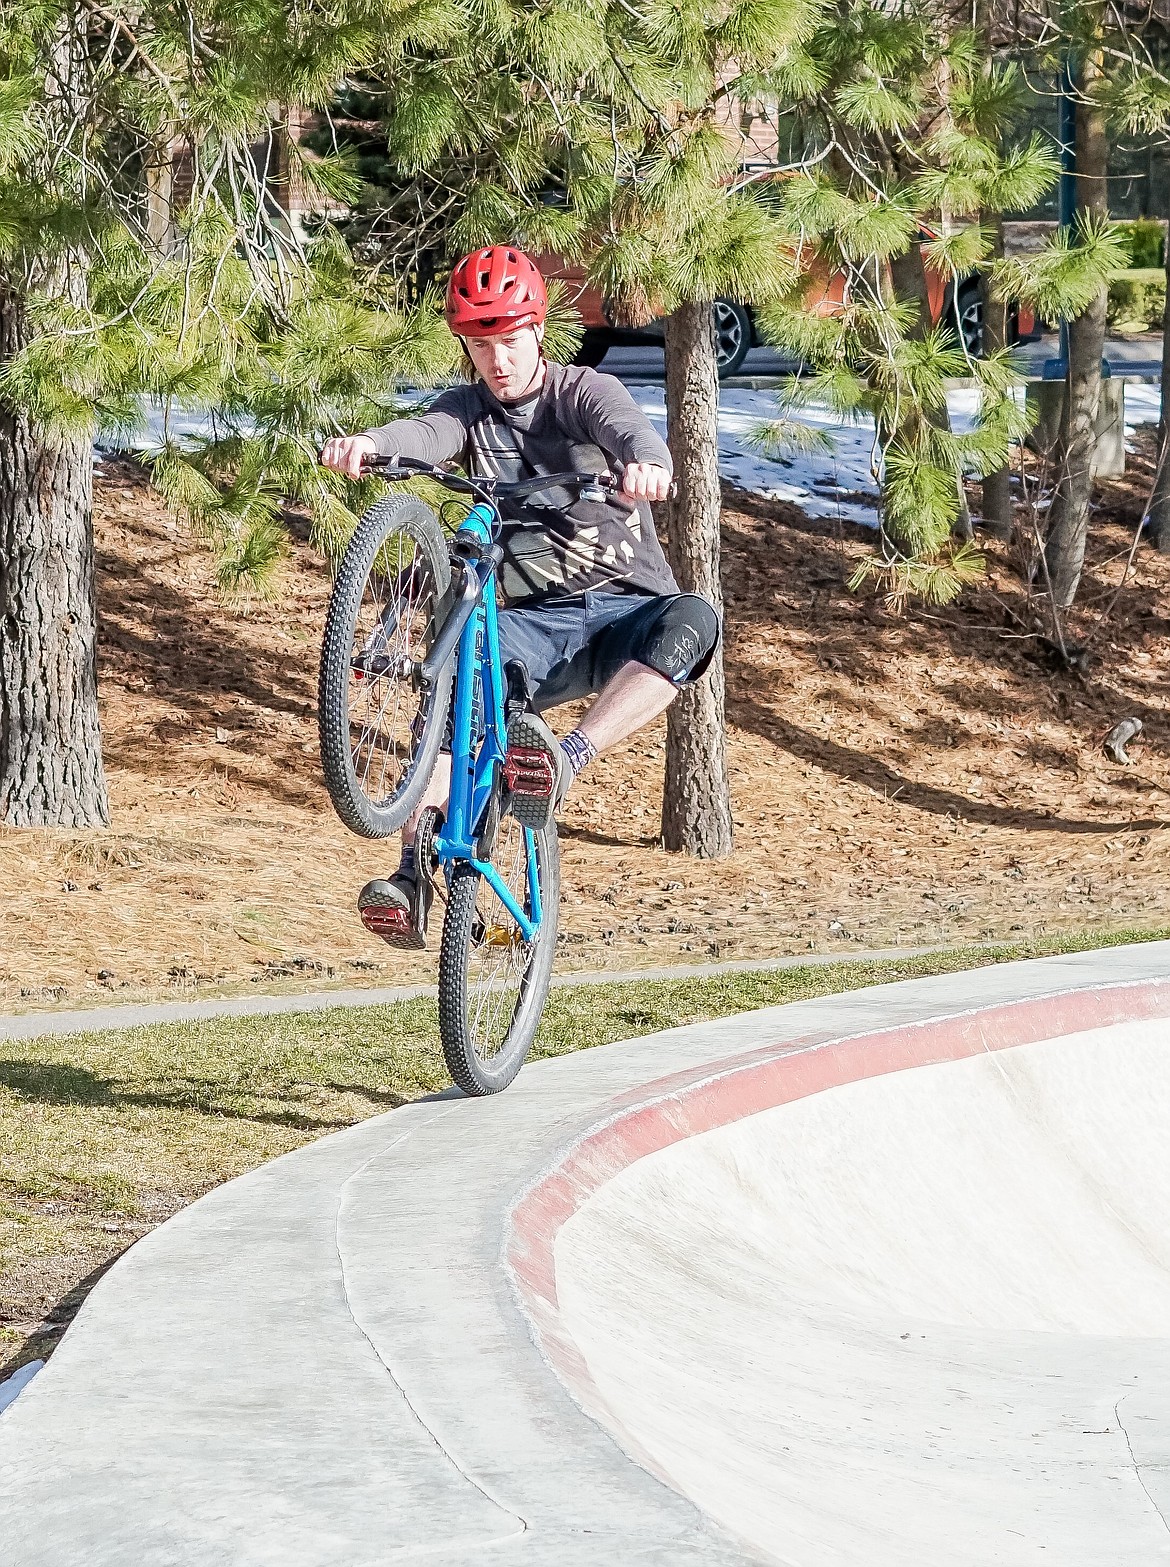 Cory Winside said the skate park at his hometown in British Columbia was still frozen over, so he decided to travel to Spokane and stopped at the Coeur d'Alene skate park on Friday to enjoy some sunshine.